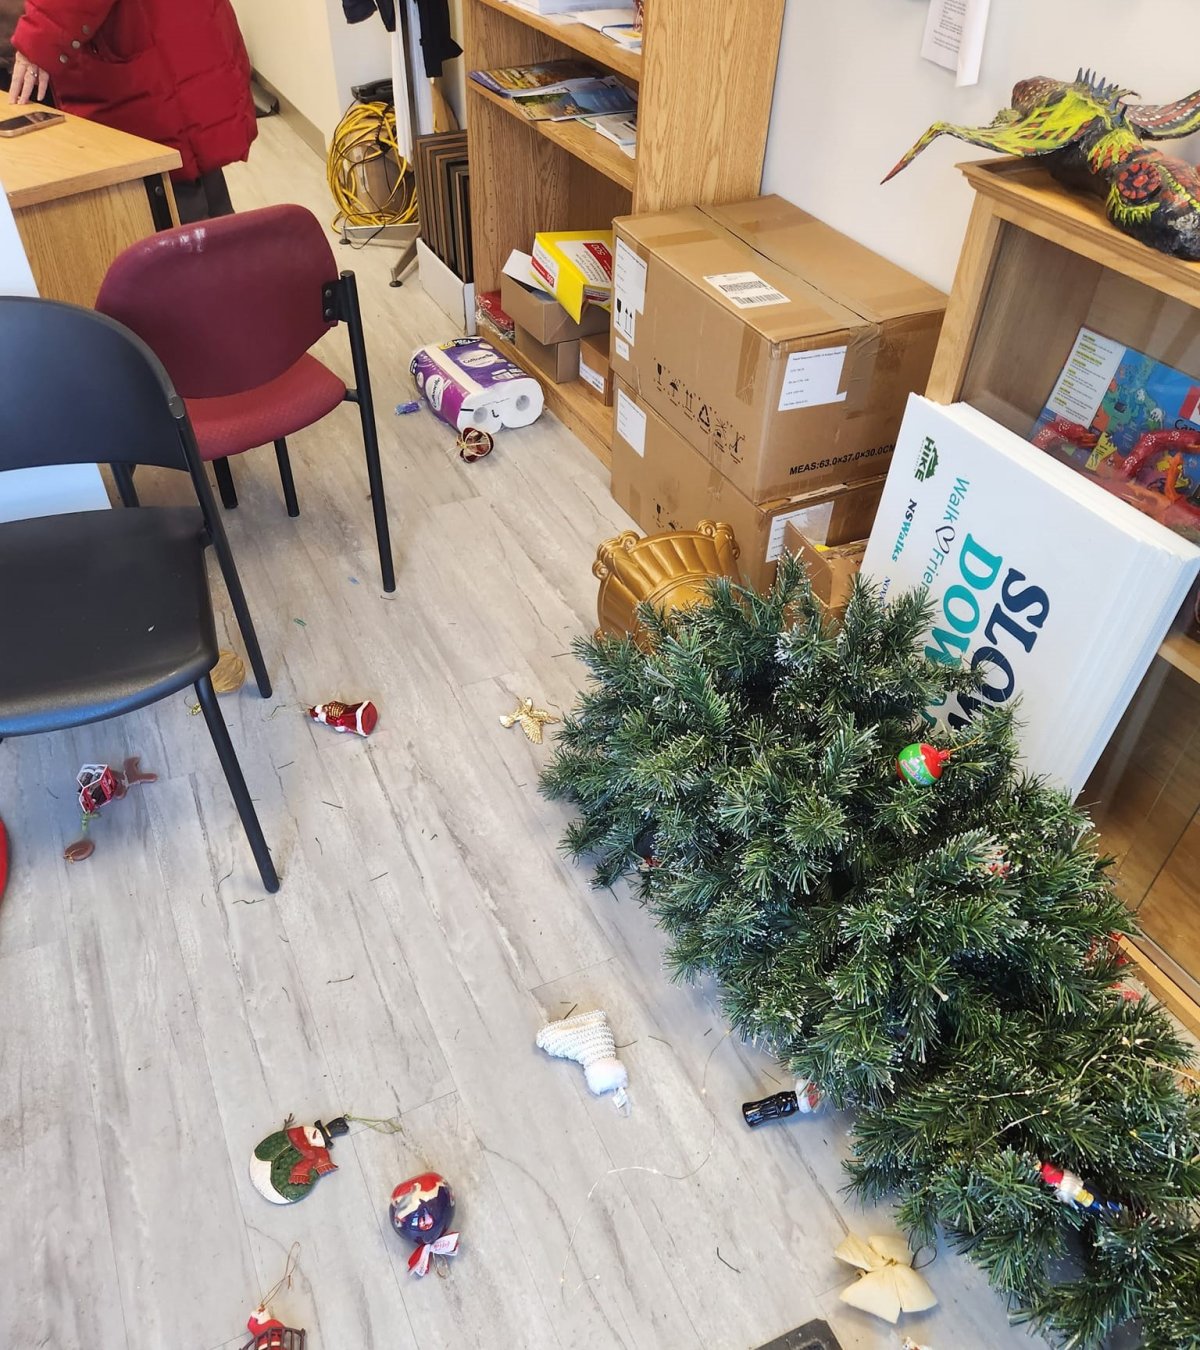 In a Facebook post from Nova Scotia Liberal MLA Brendan Maguire on Thursday, a tree is shown knocked over as ornaments are scattered across the floor following an alleged assault that occurred at his constituency office.